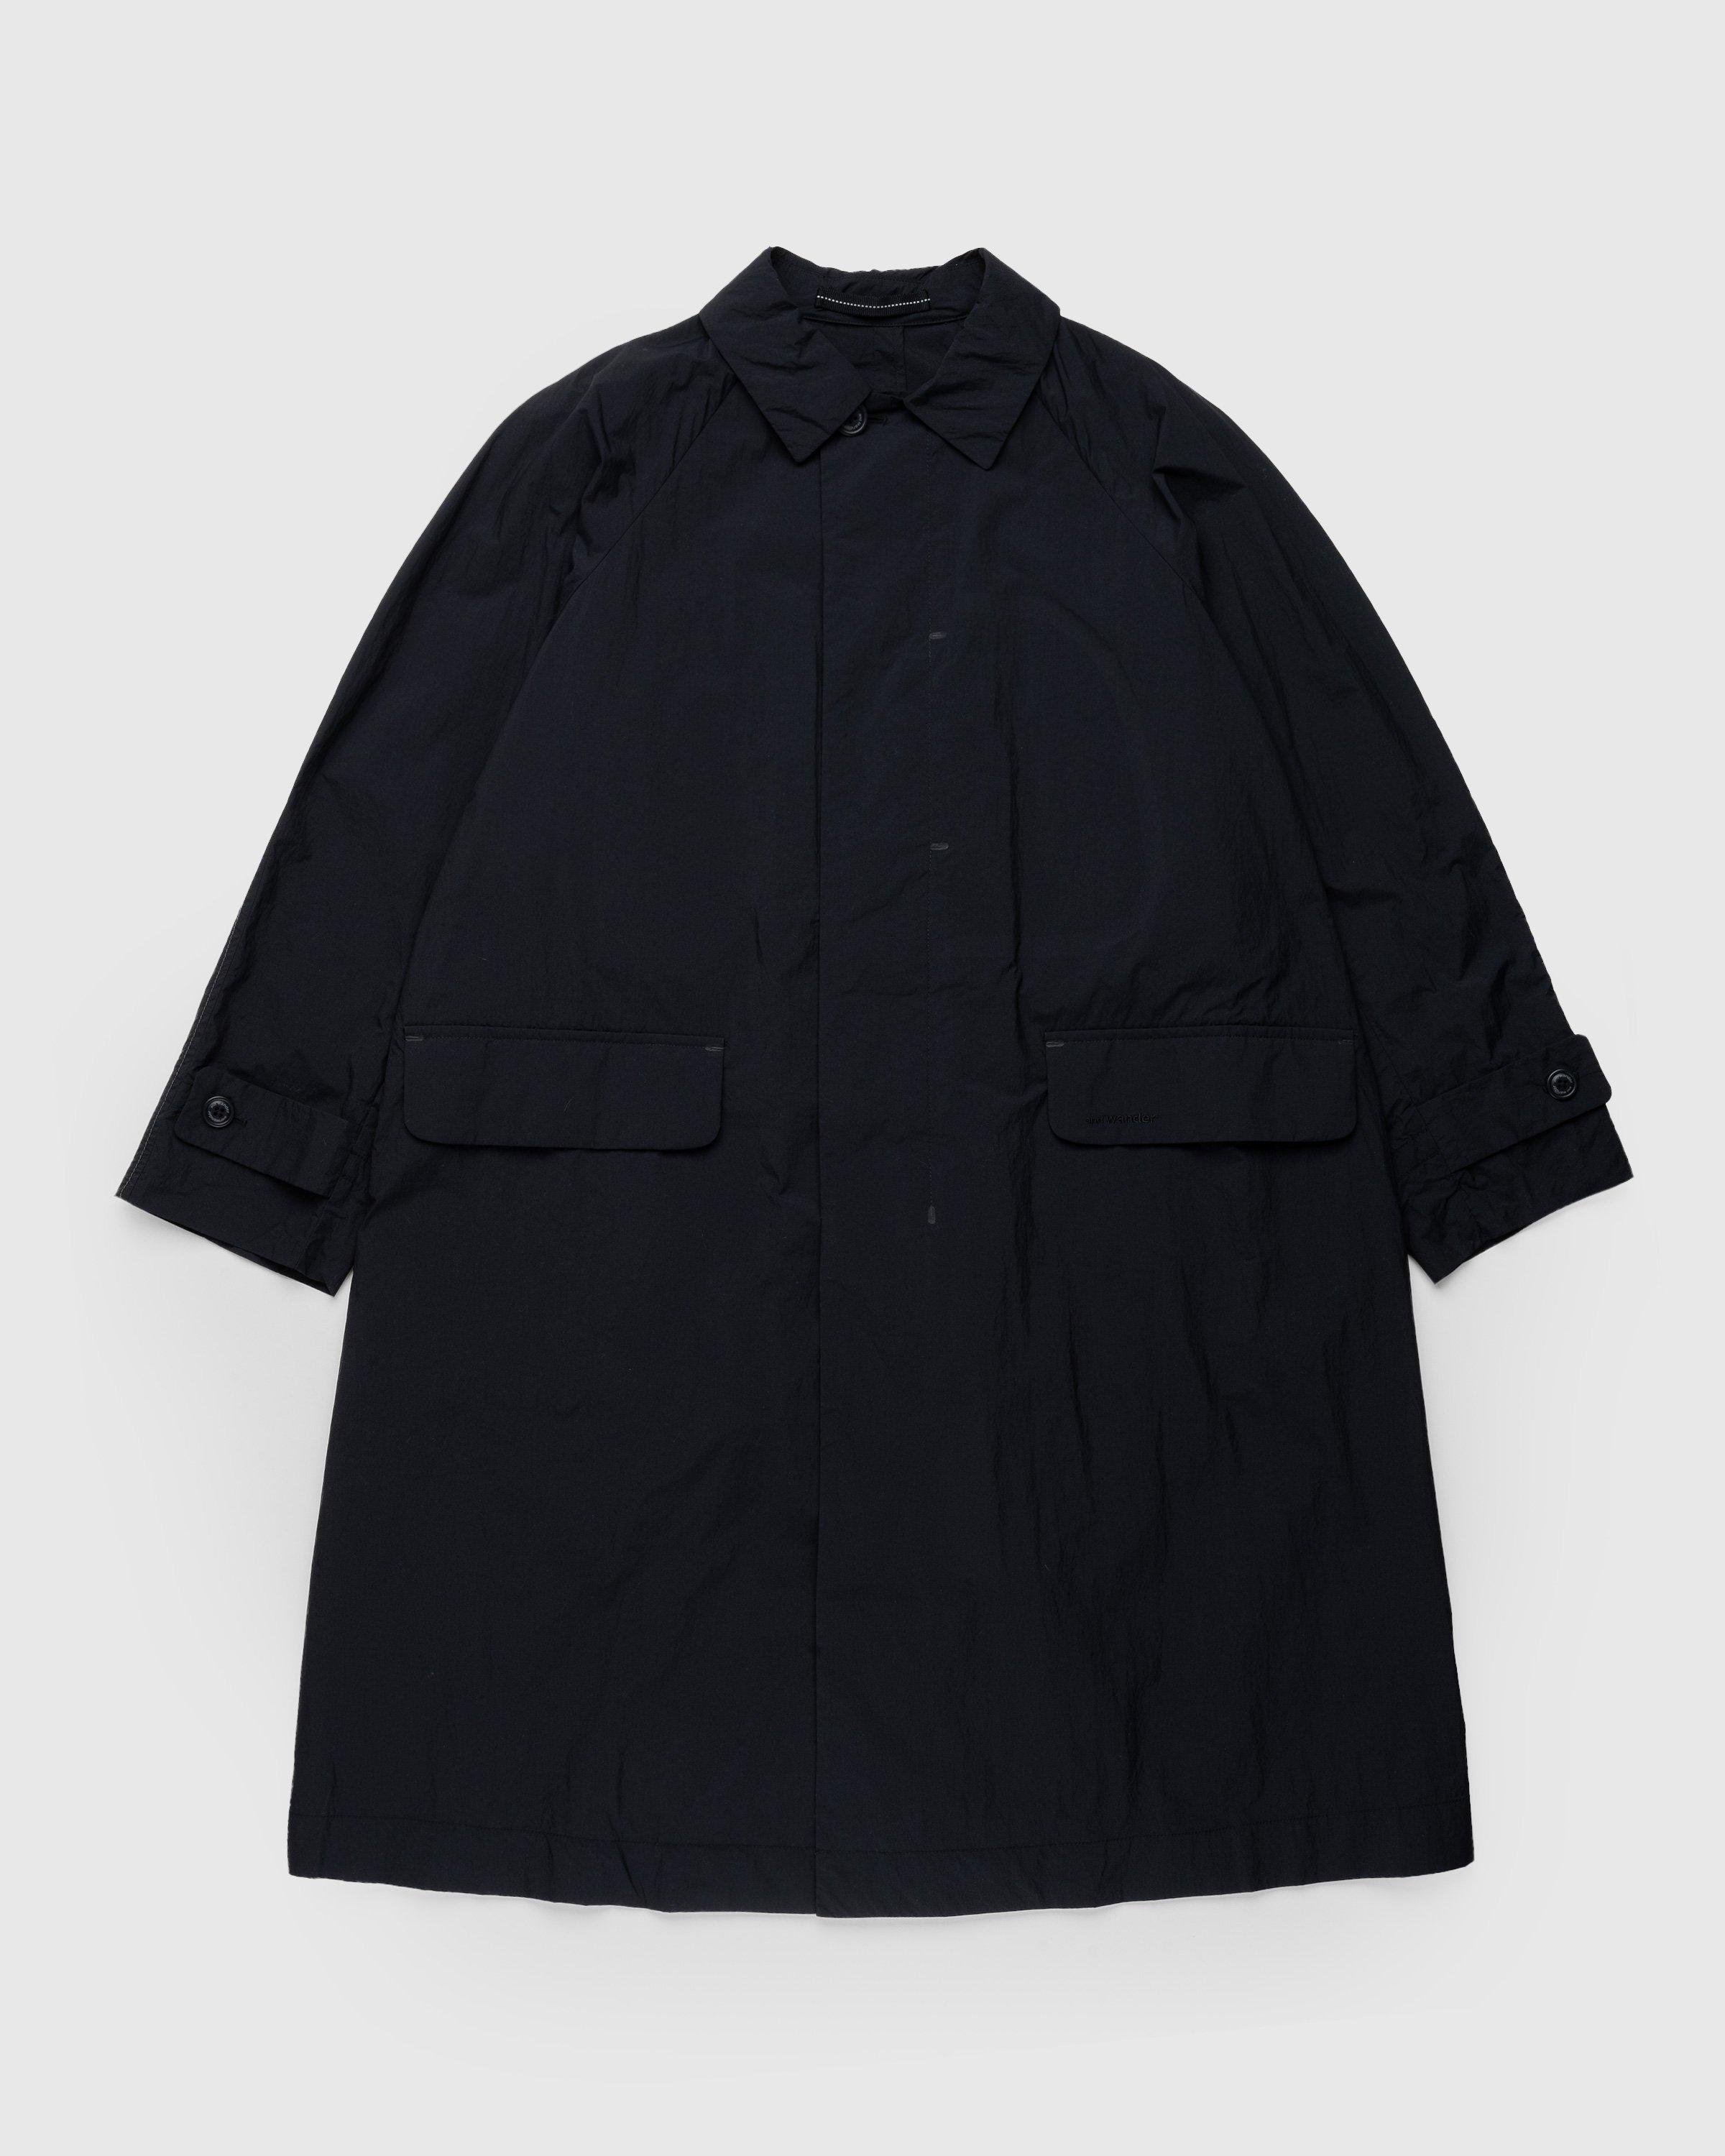 And WanderWater-Repellent Light Coat Black by HIGHSNOBIETY